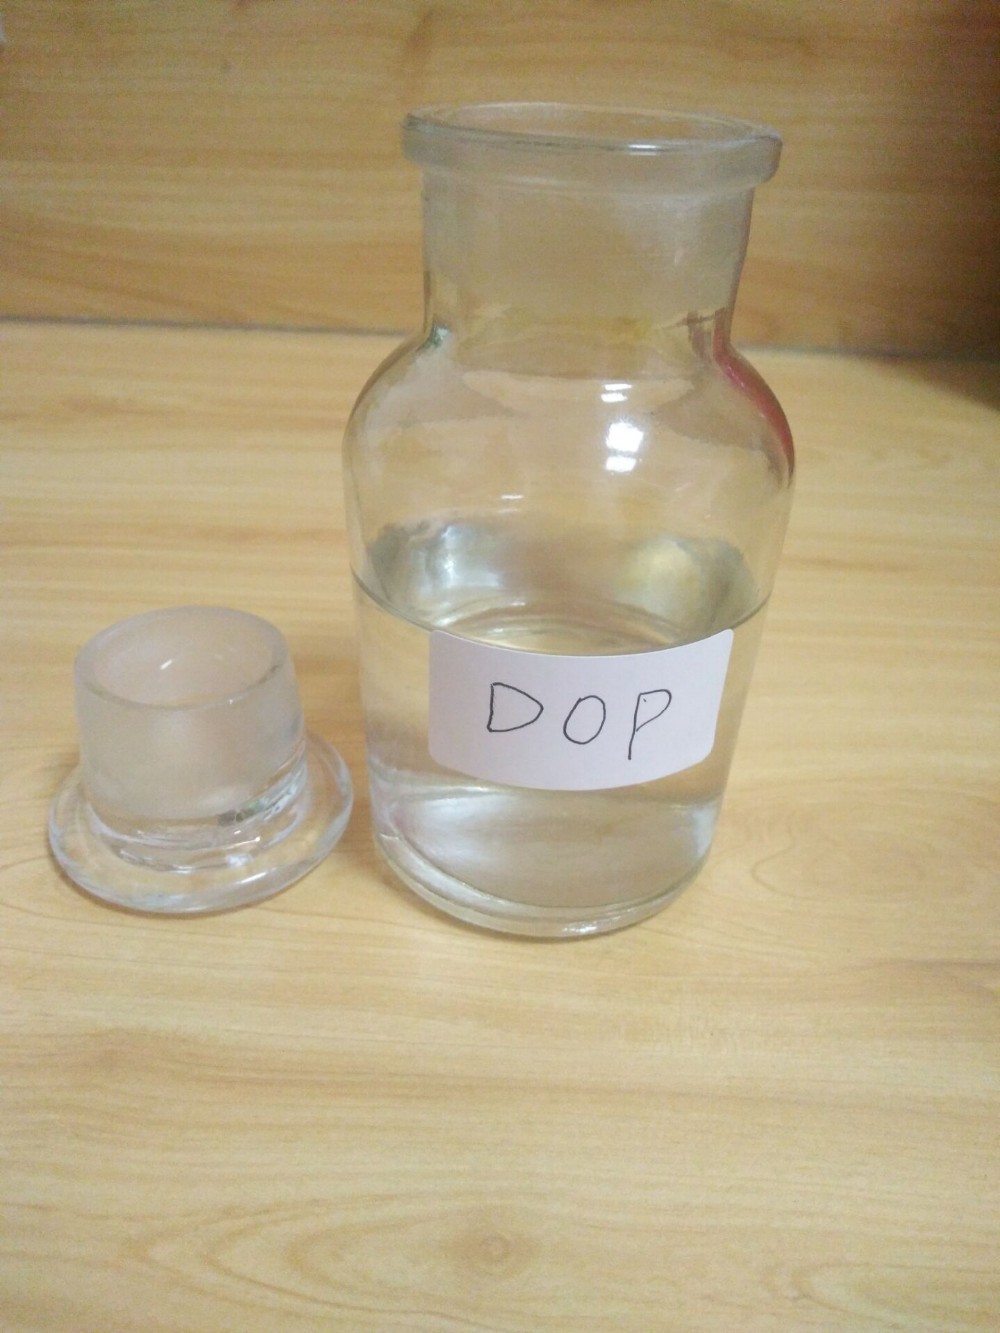 Diocty phthalate DOP chemical 99.5% CAS 117-81-7 for Industry Electrical